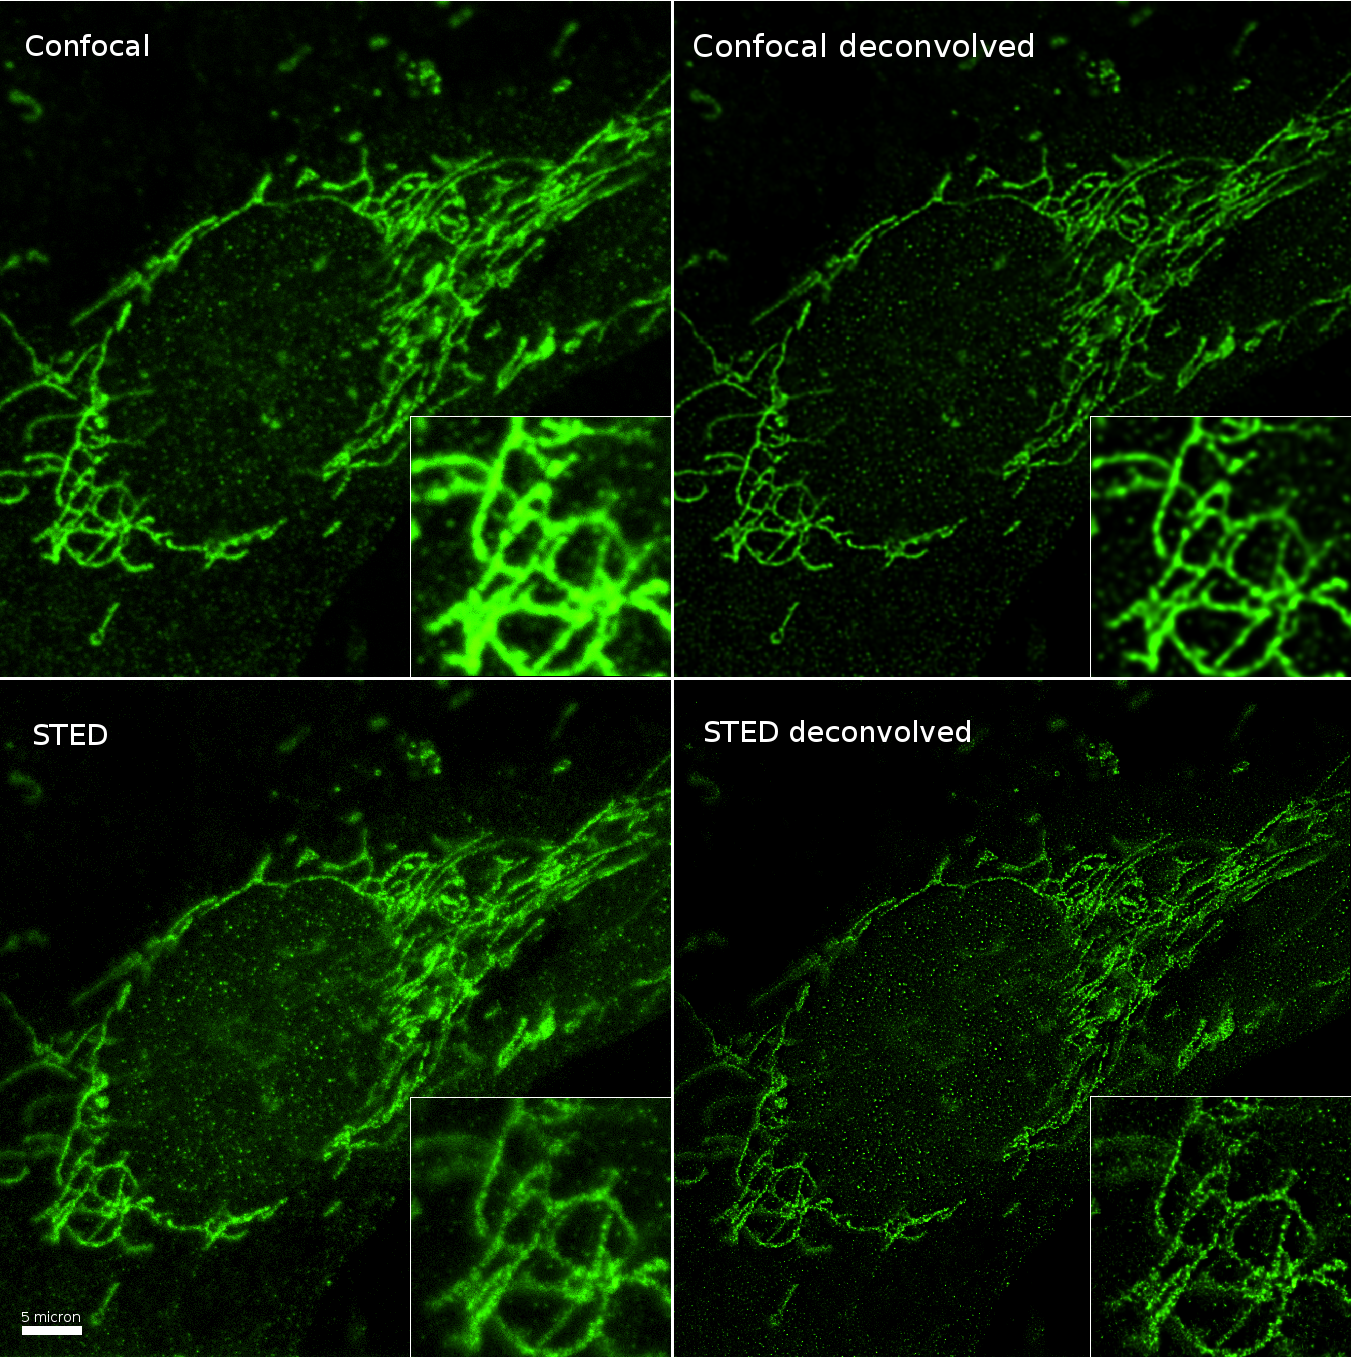 Series049_Confocal_STED_Raw_and_decon_Figure.png